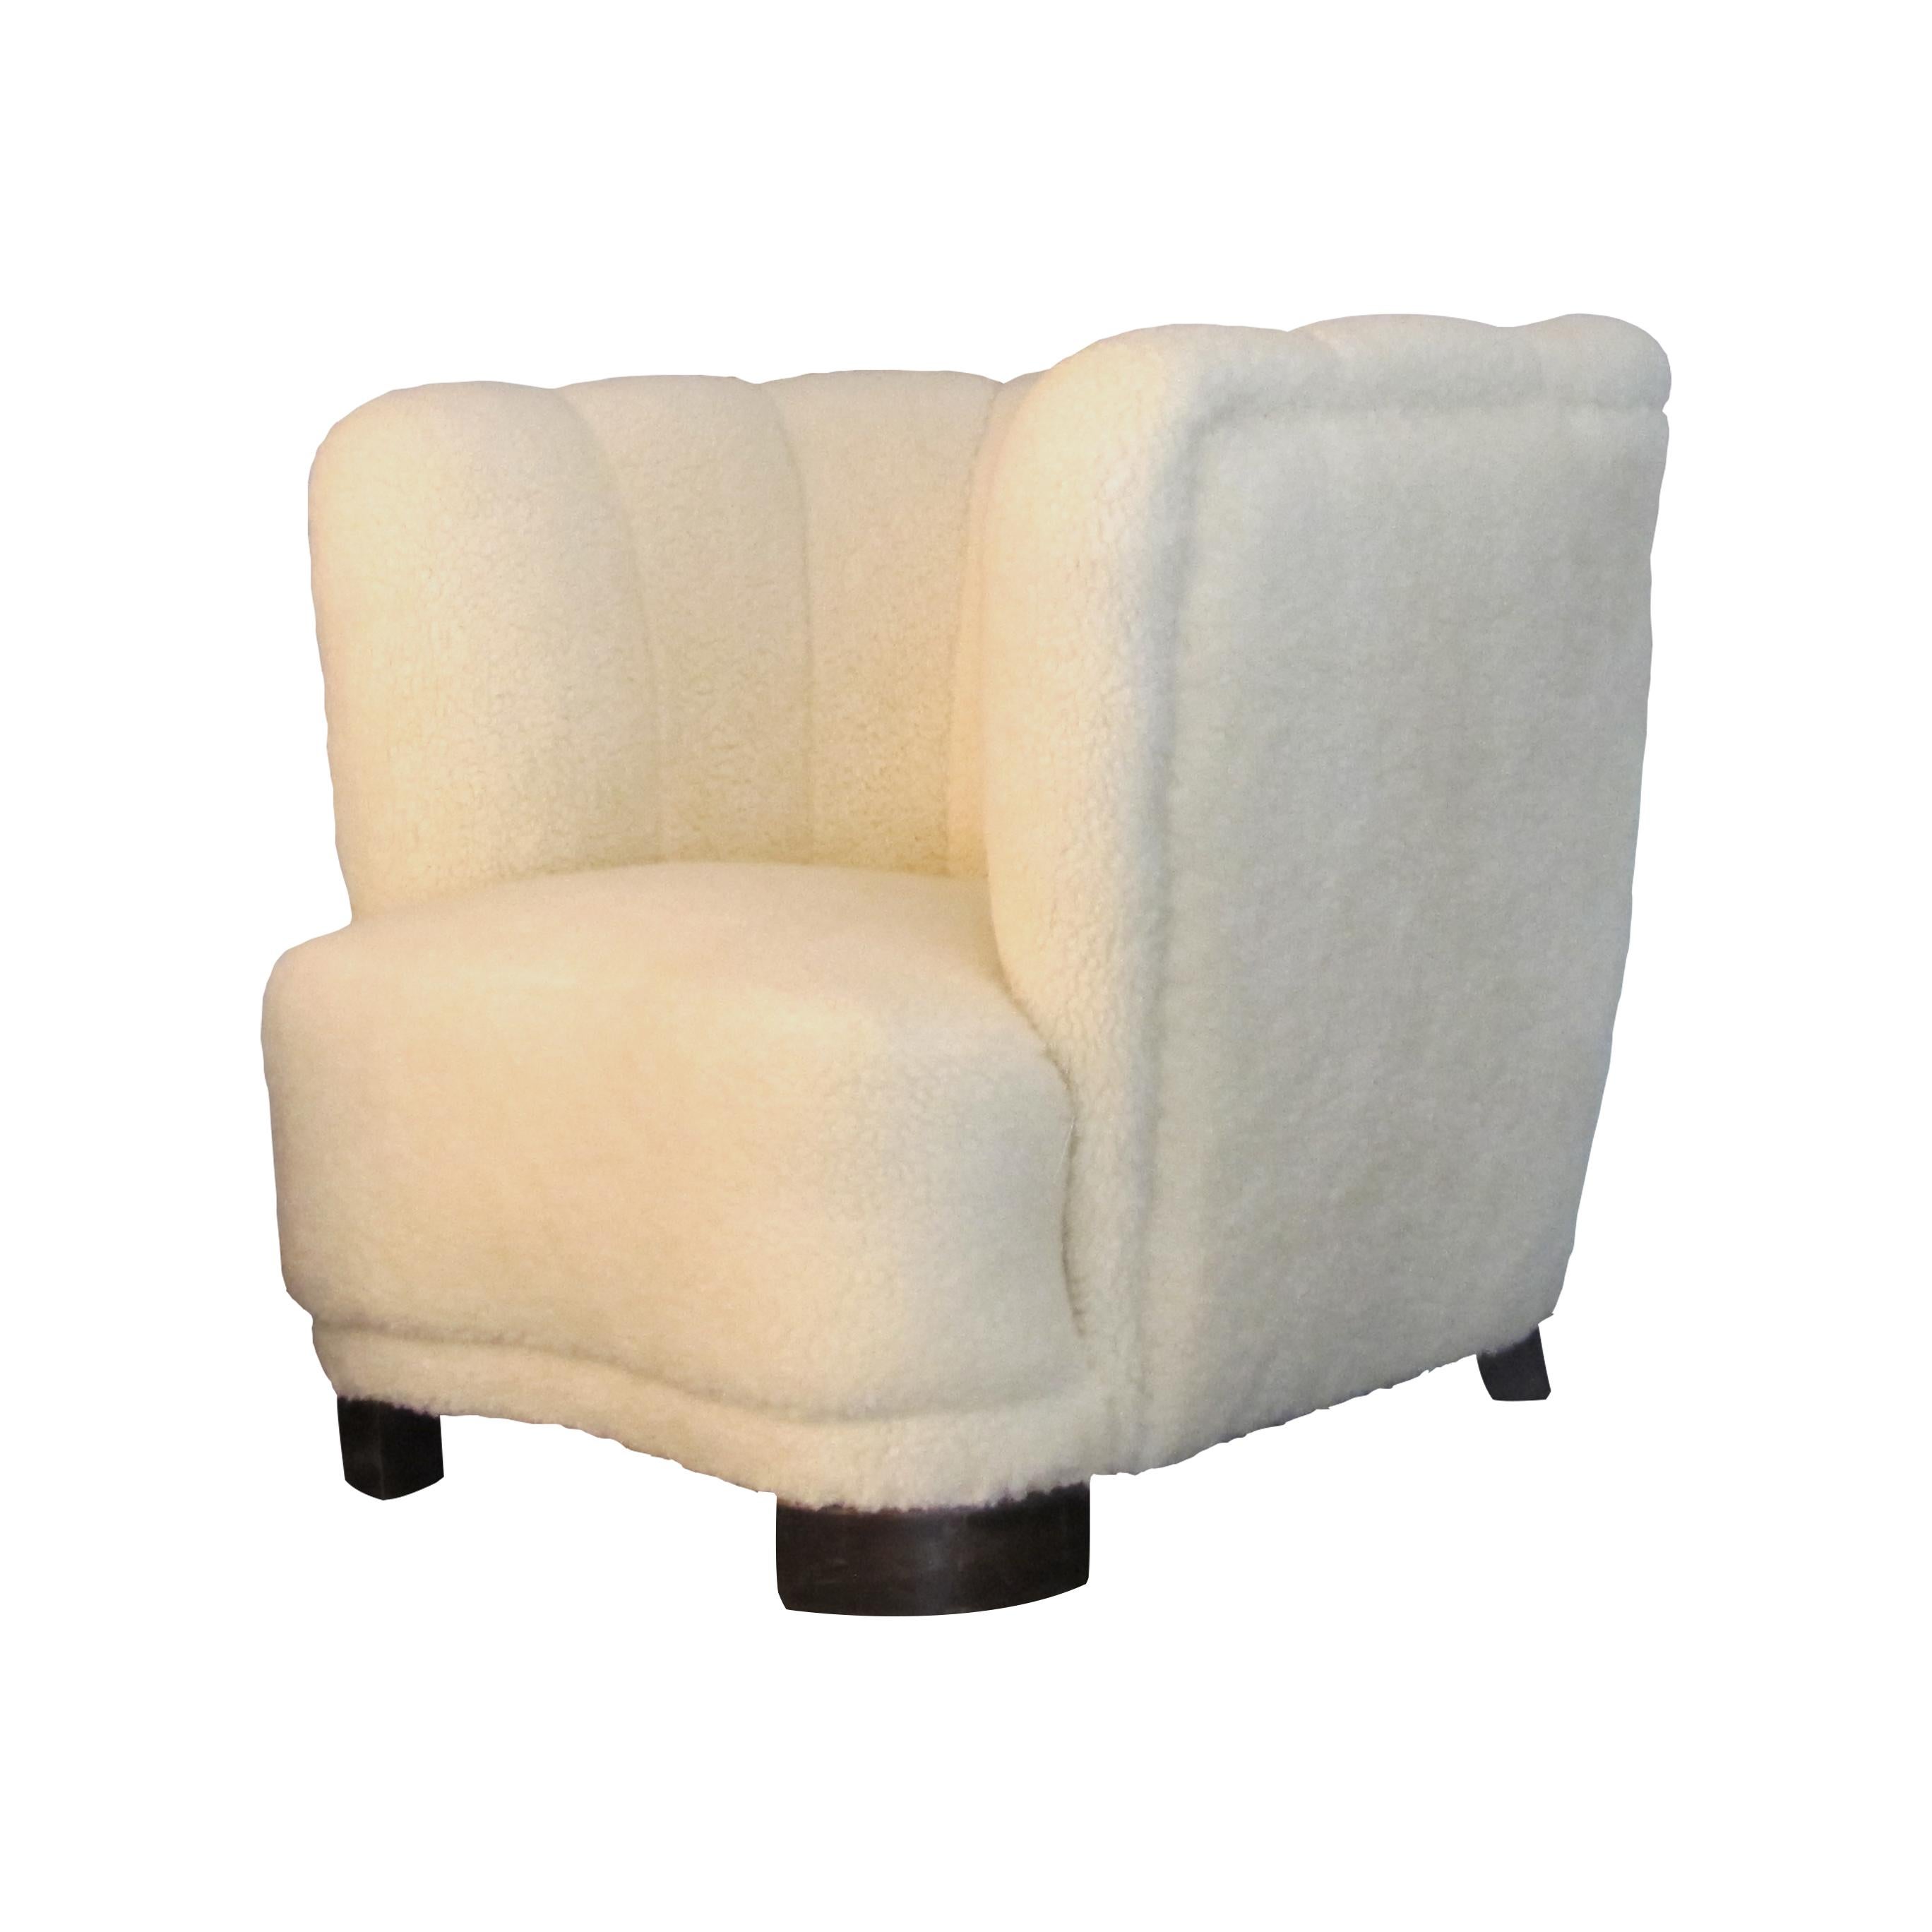 Other Swedish, 1930s Art Deco Single Club Armchair Newly Upholstered, Lambskin Fabric